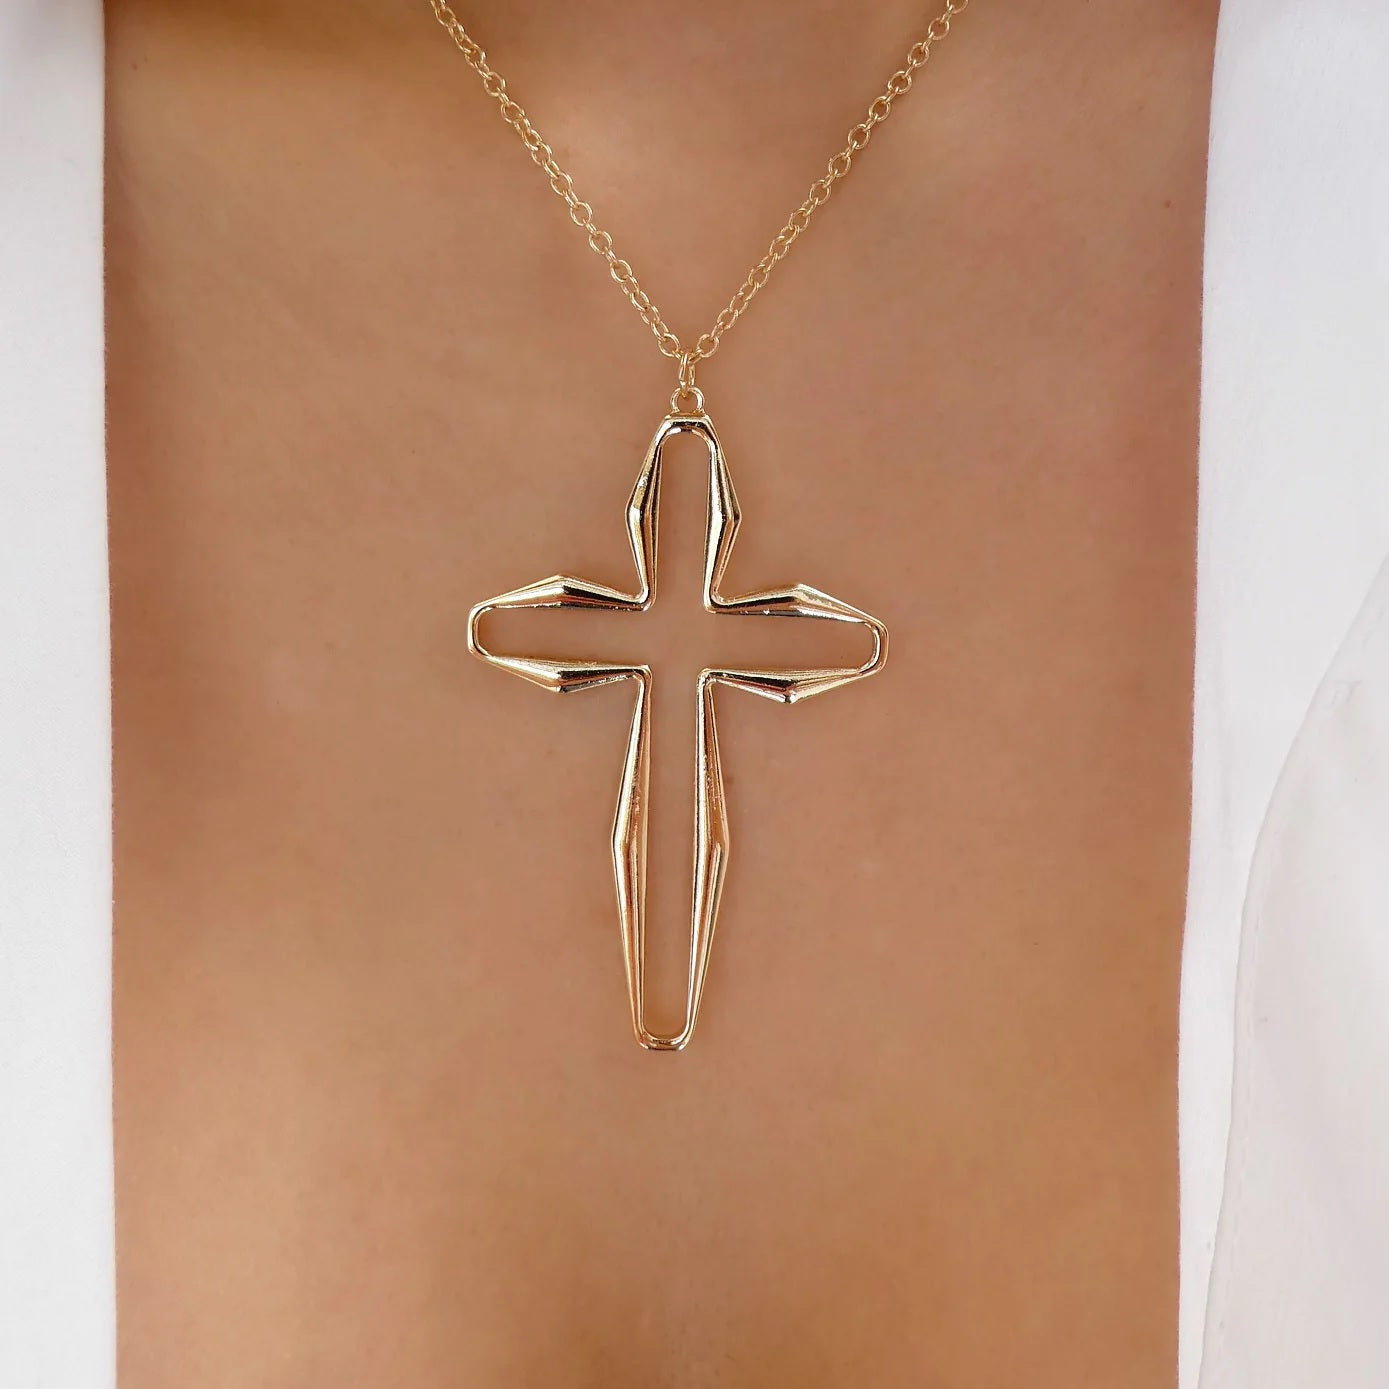 Evening Crossover Cross Necklace (Gold) - Delta Swanky Girl